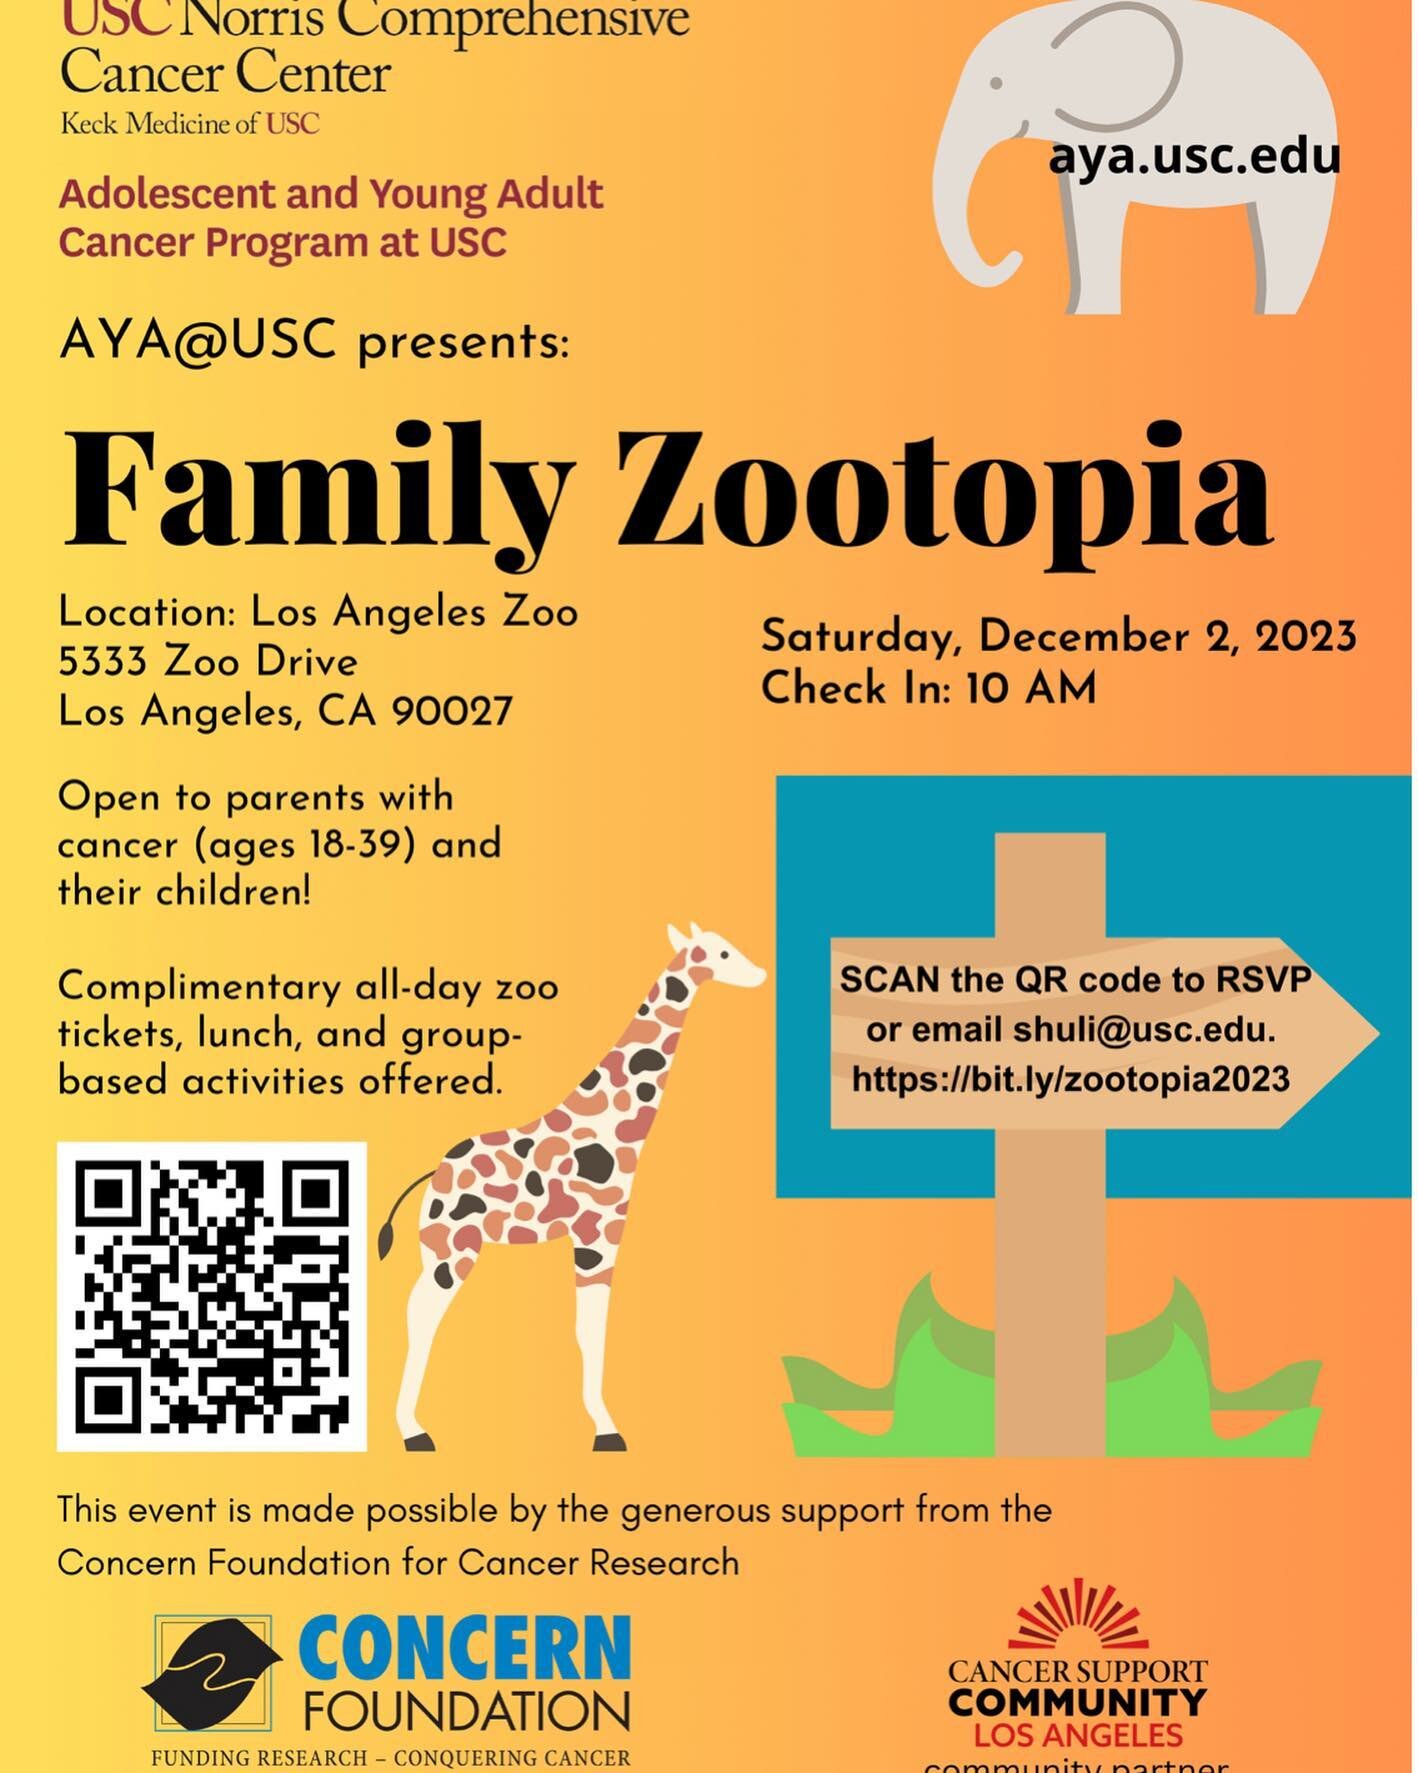 If you are a young adult cancer patient or survivor, and if you are a parent, please bring your family and join us this Saturday on December 2 at the Los Angeles Zoo and Botanic Garden for a relaxing and fun day! Free zoo tickets and gourmet lunch in